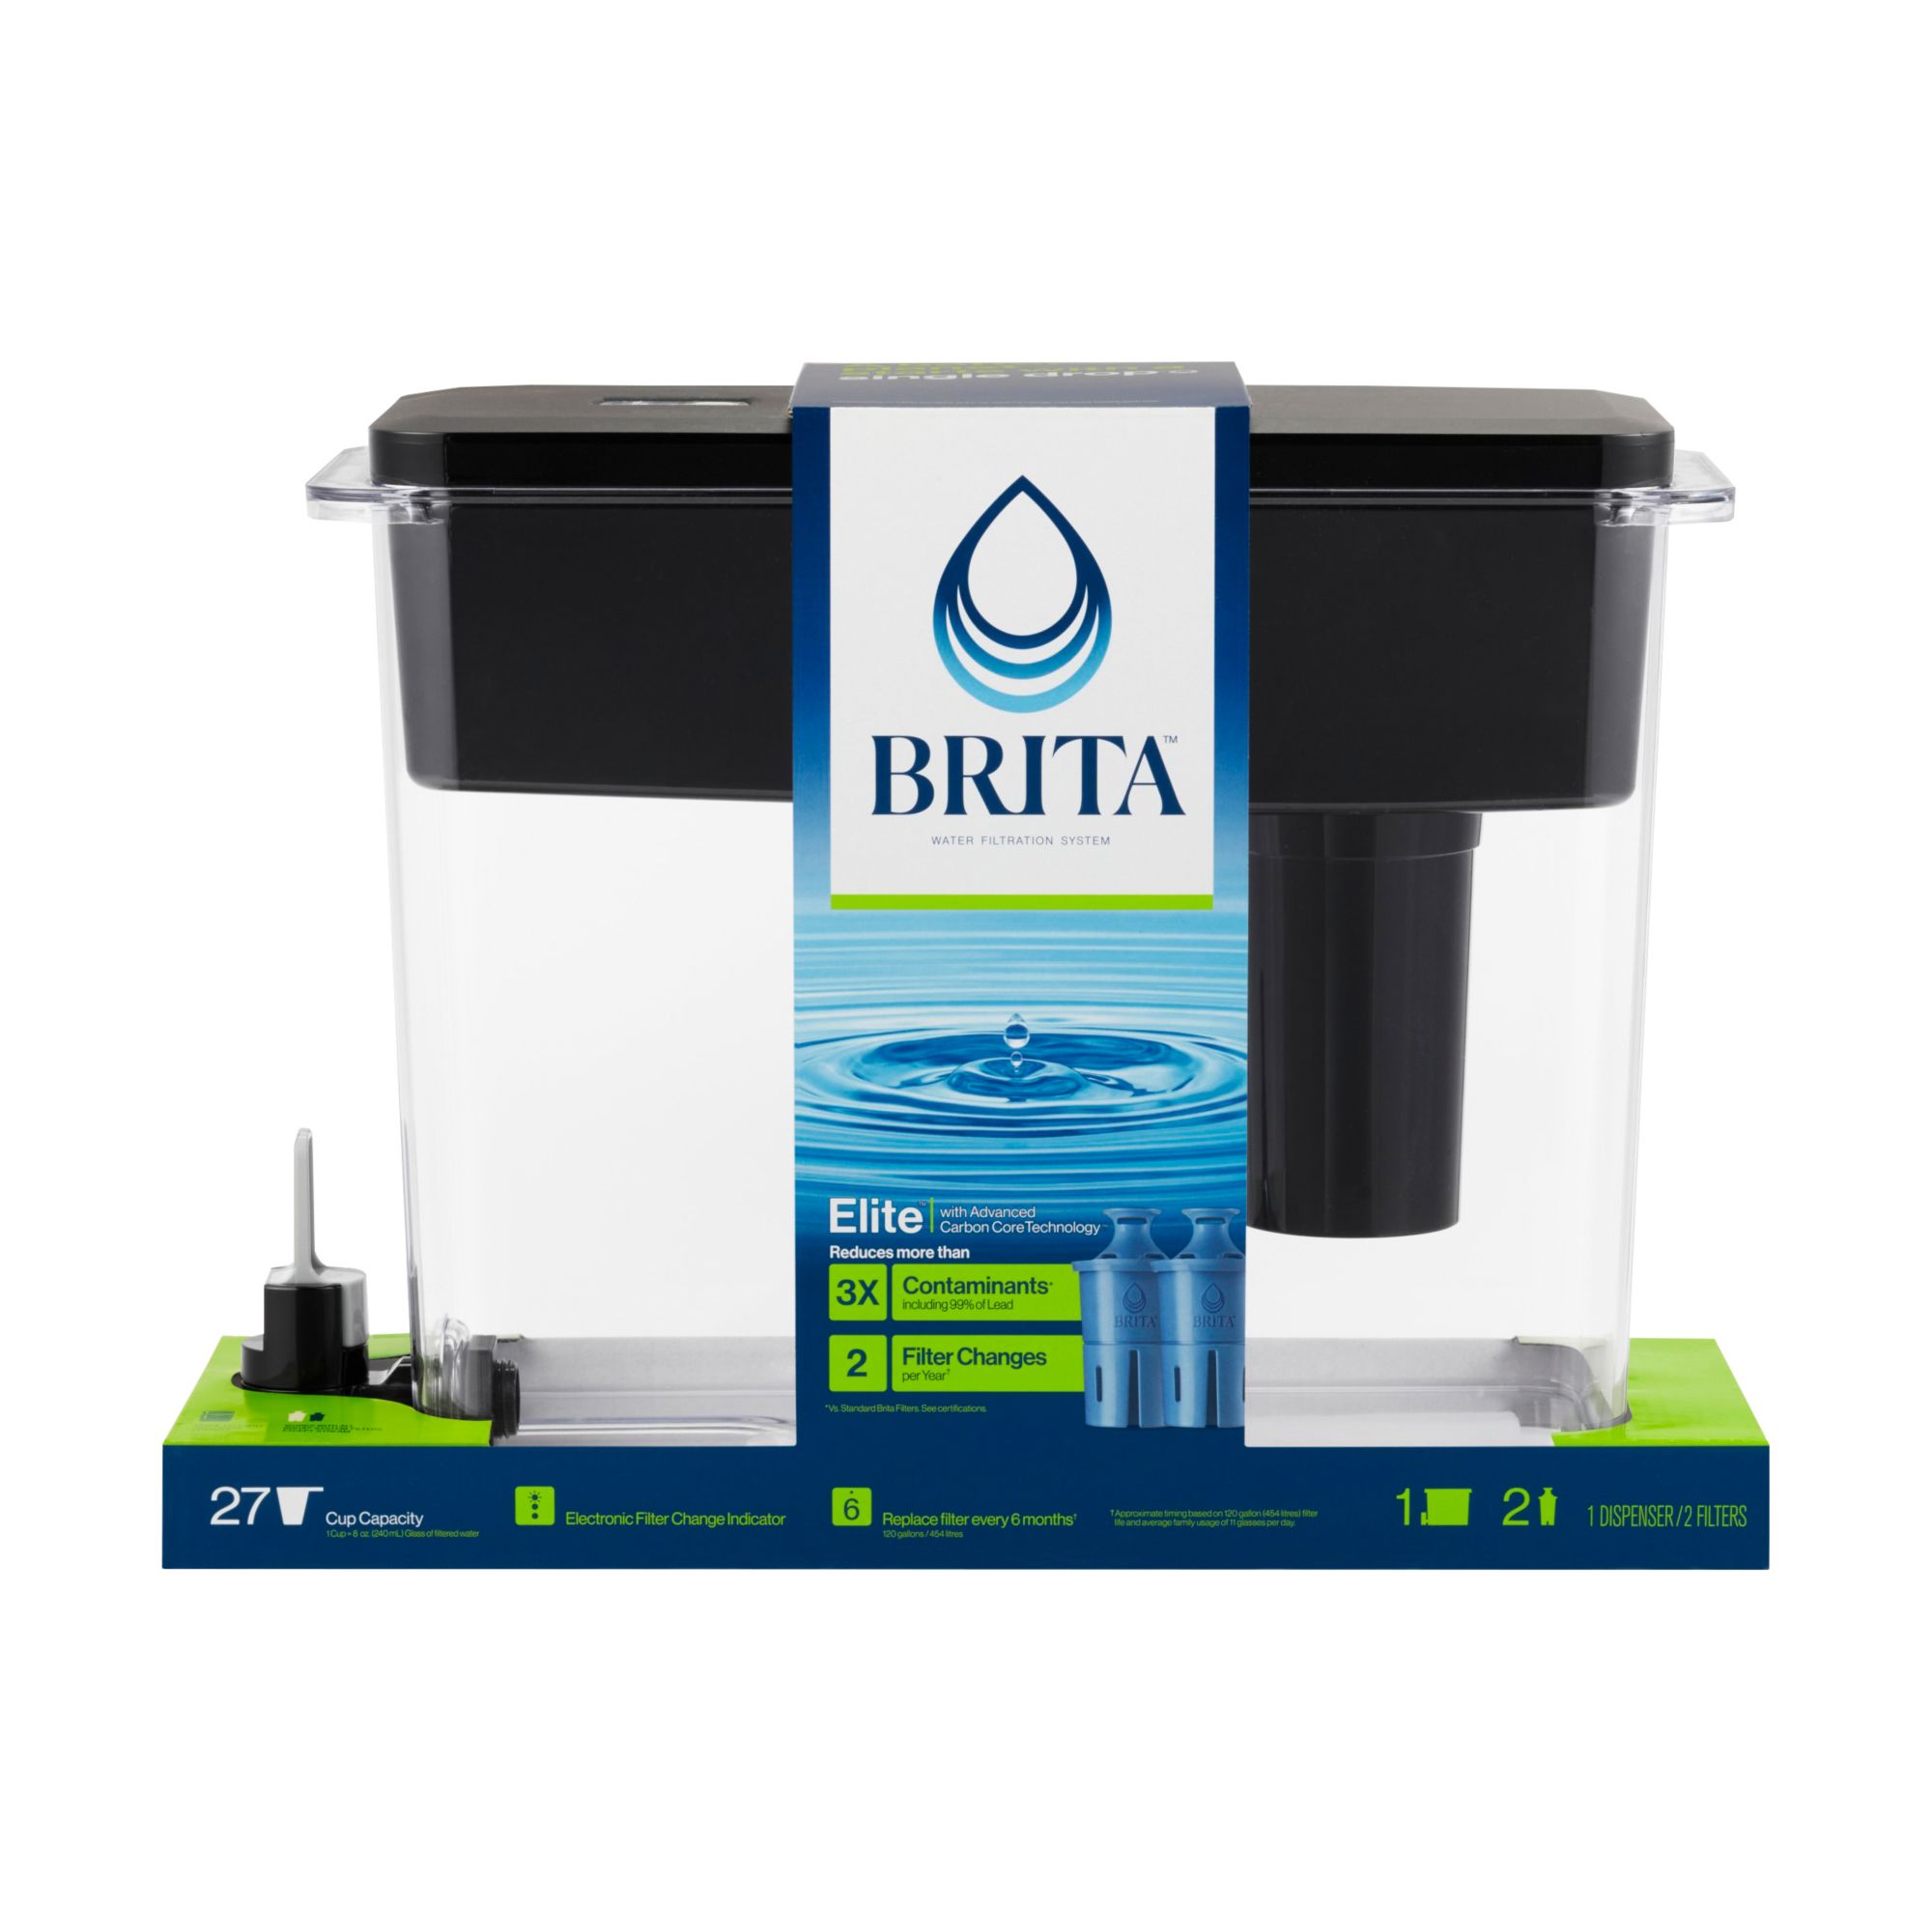 Reviews for Brita Faucet Mount Tap Water Filtration System in Chrome, BPA  Free, Reduces Lead